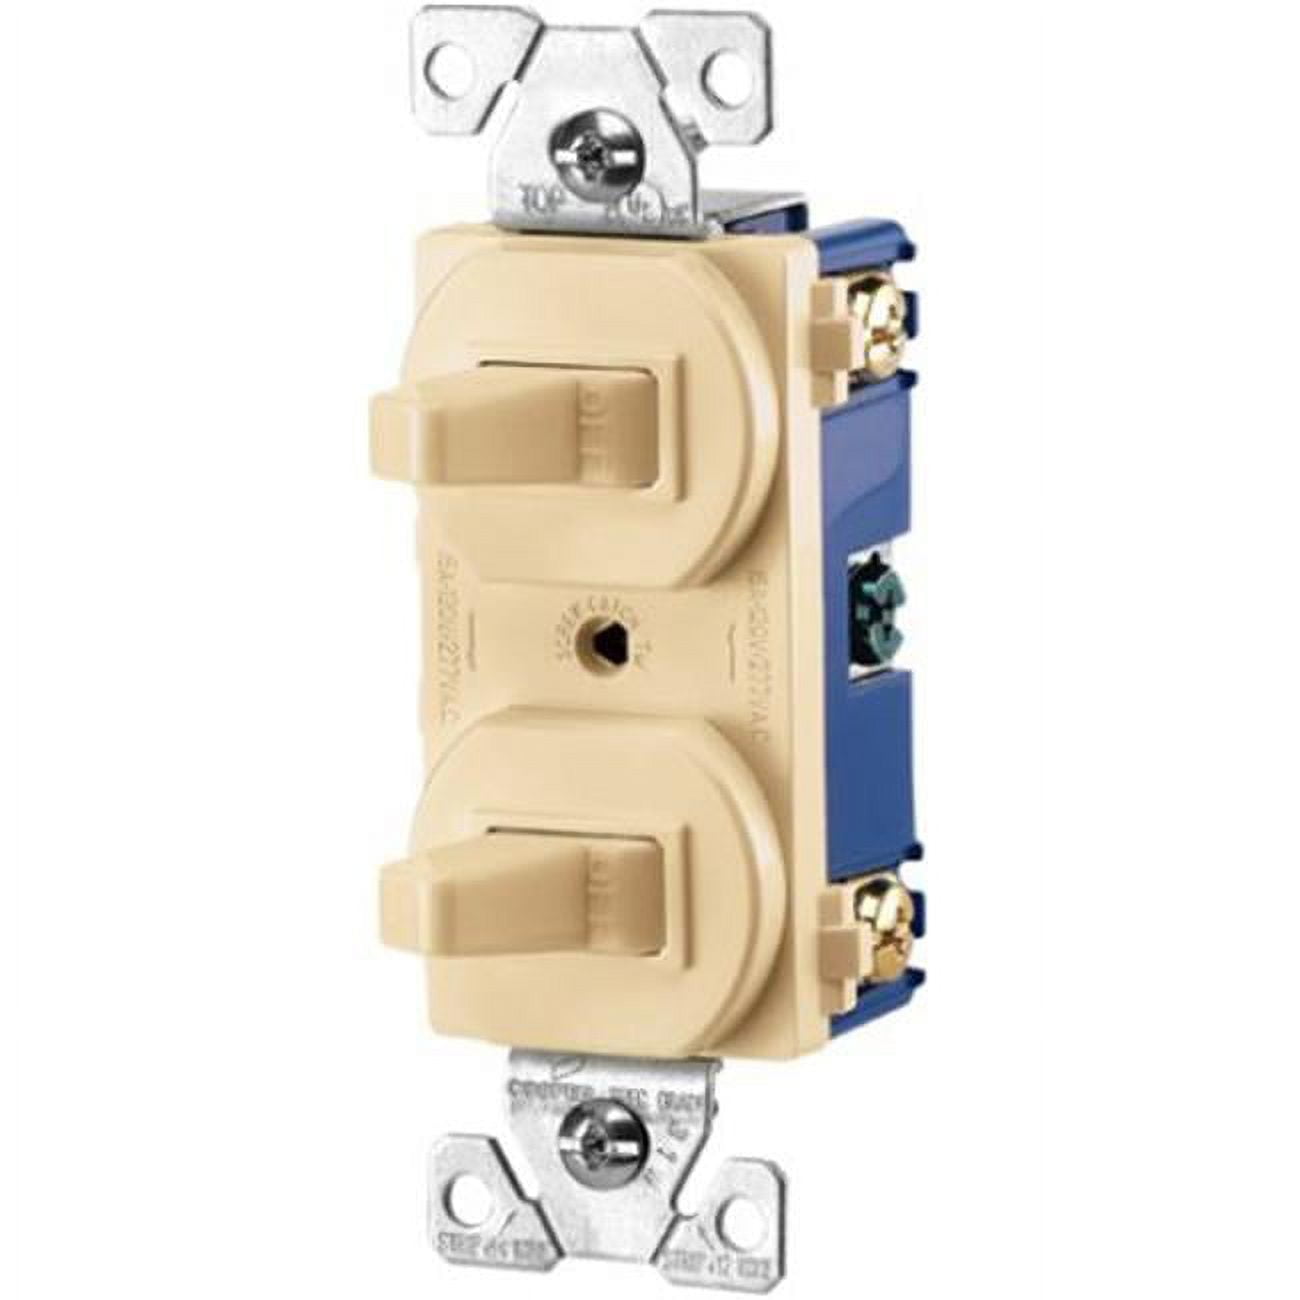 Cooper Wiring 275v-box 15-amp 120-277v Commercial Grade Combination Single Pole Toggle Switch & 3-way Switch, Ivory